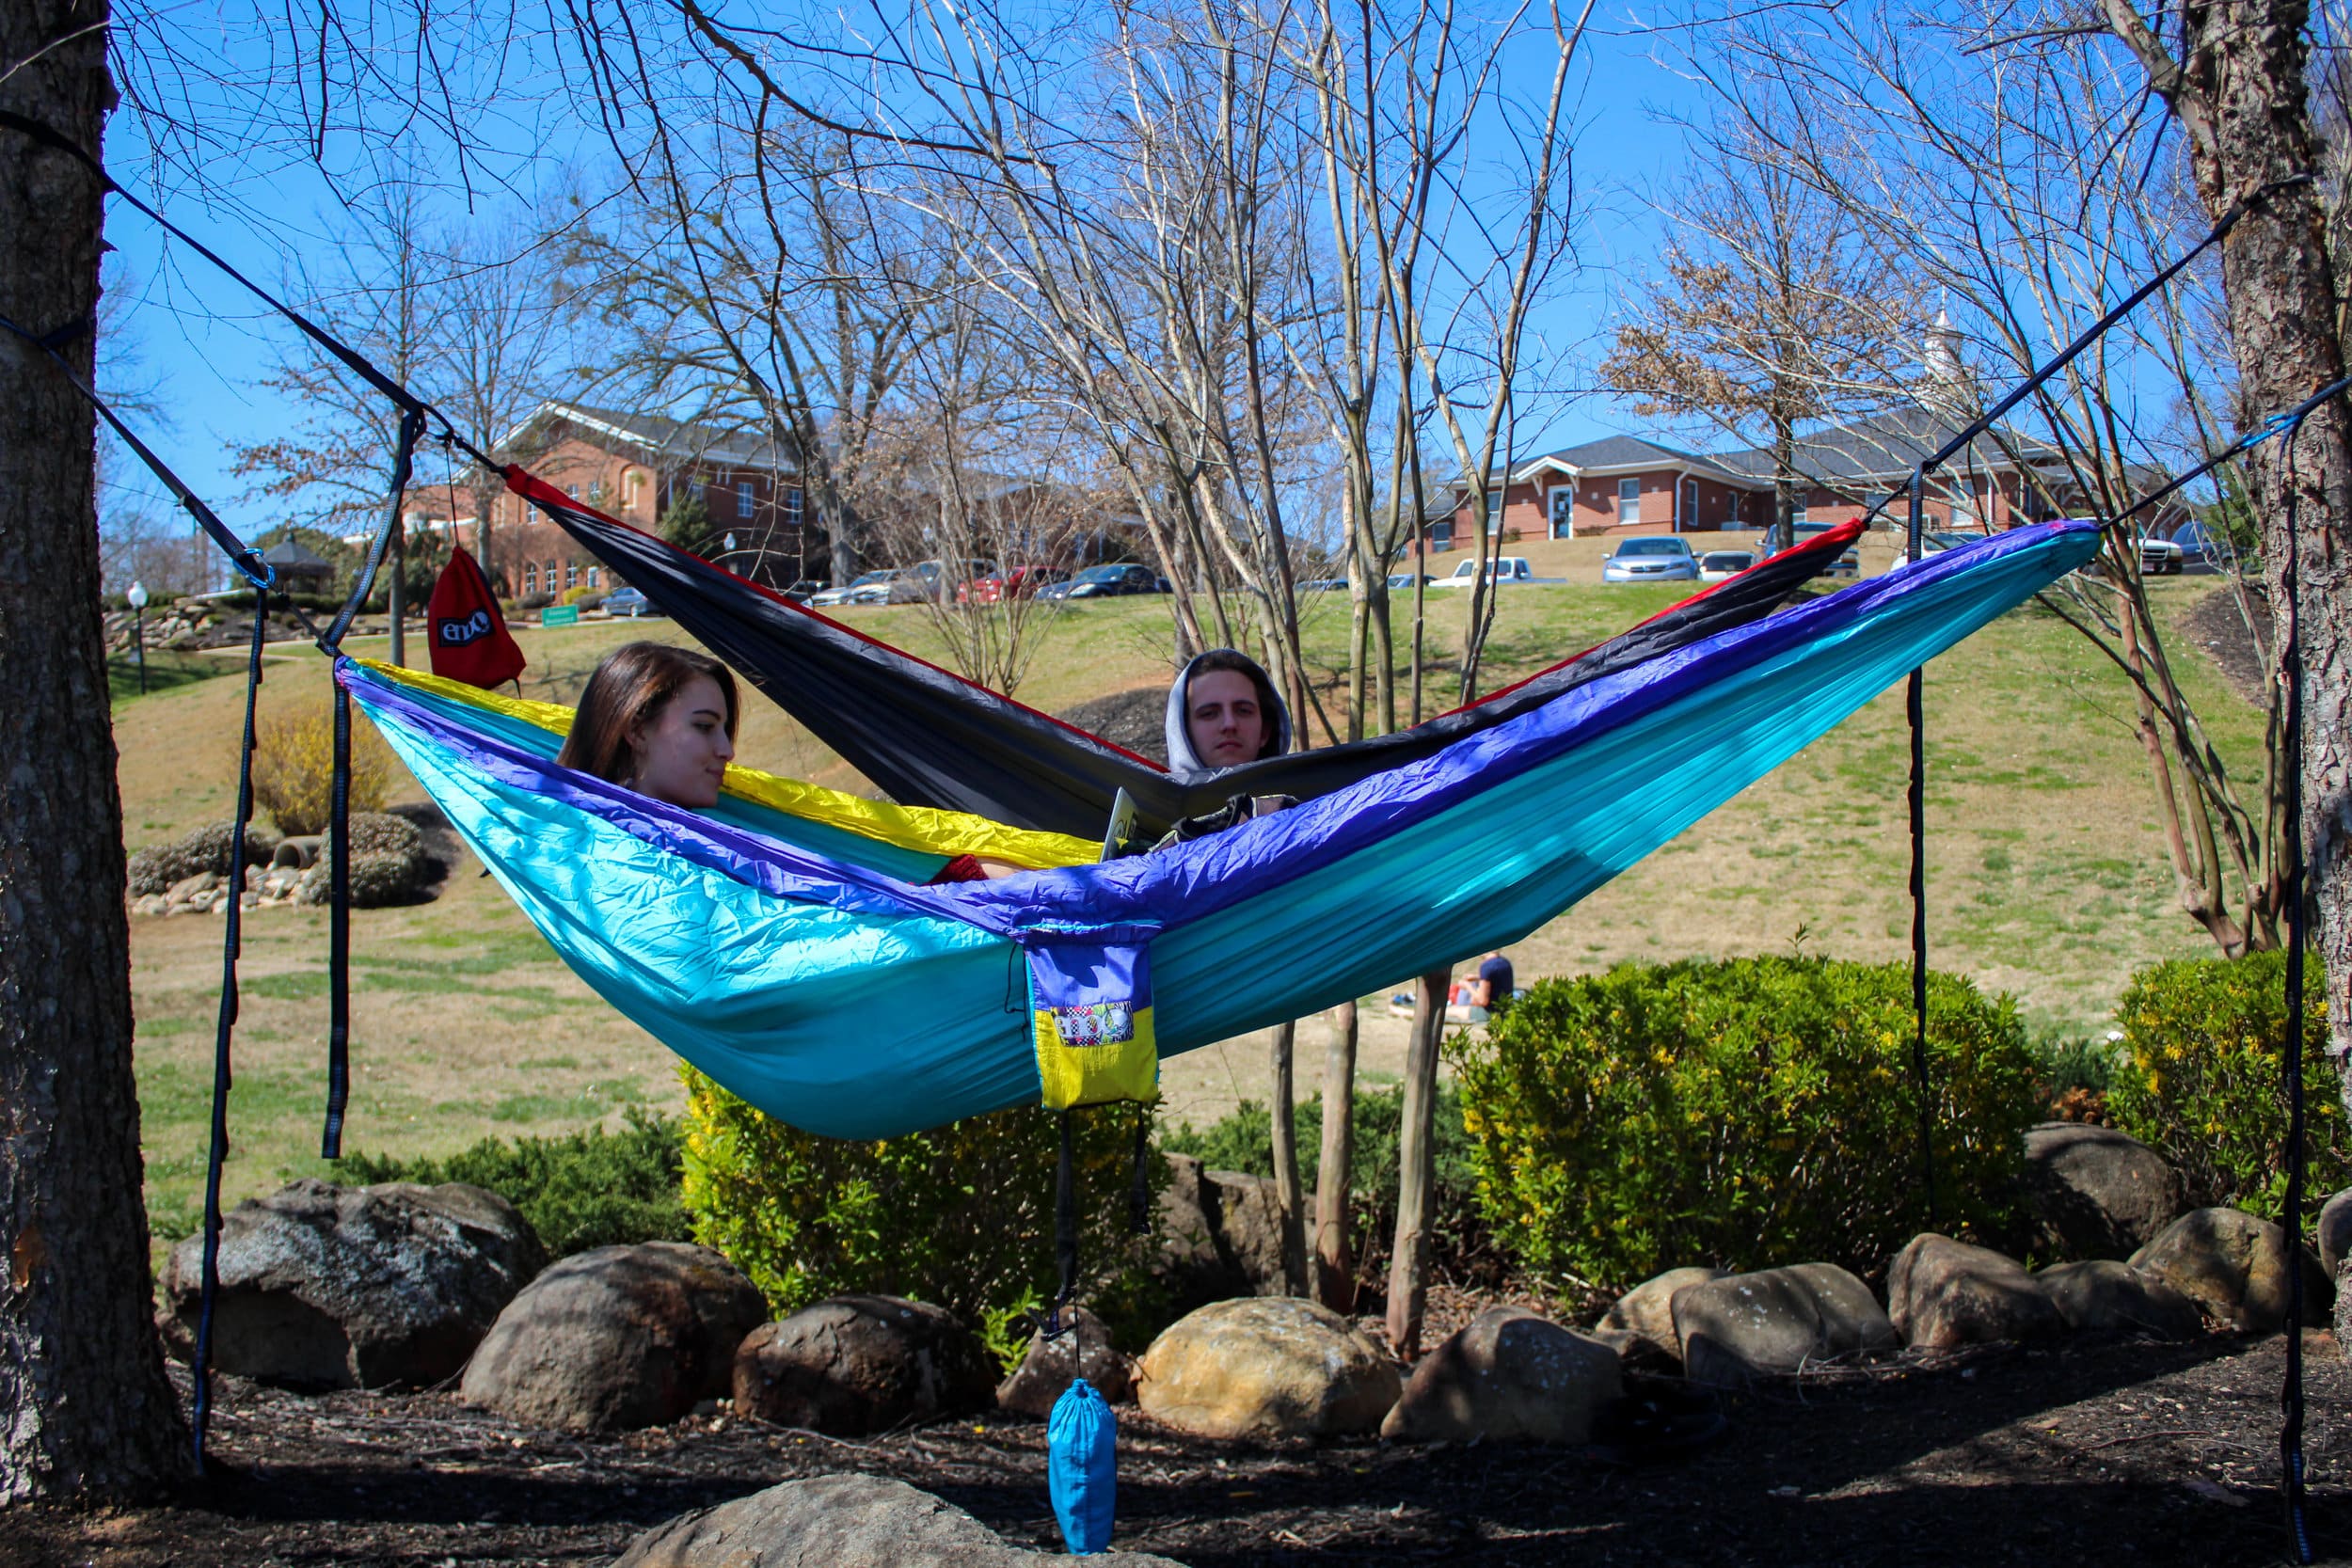 Junior psychology major Meghan Miller and junior marketing major Jordon Connor take advantage of the nice weather and study together in their enos.